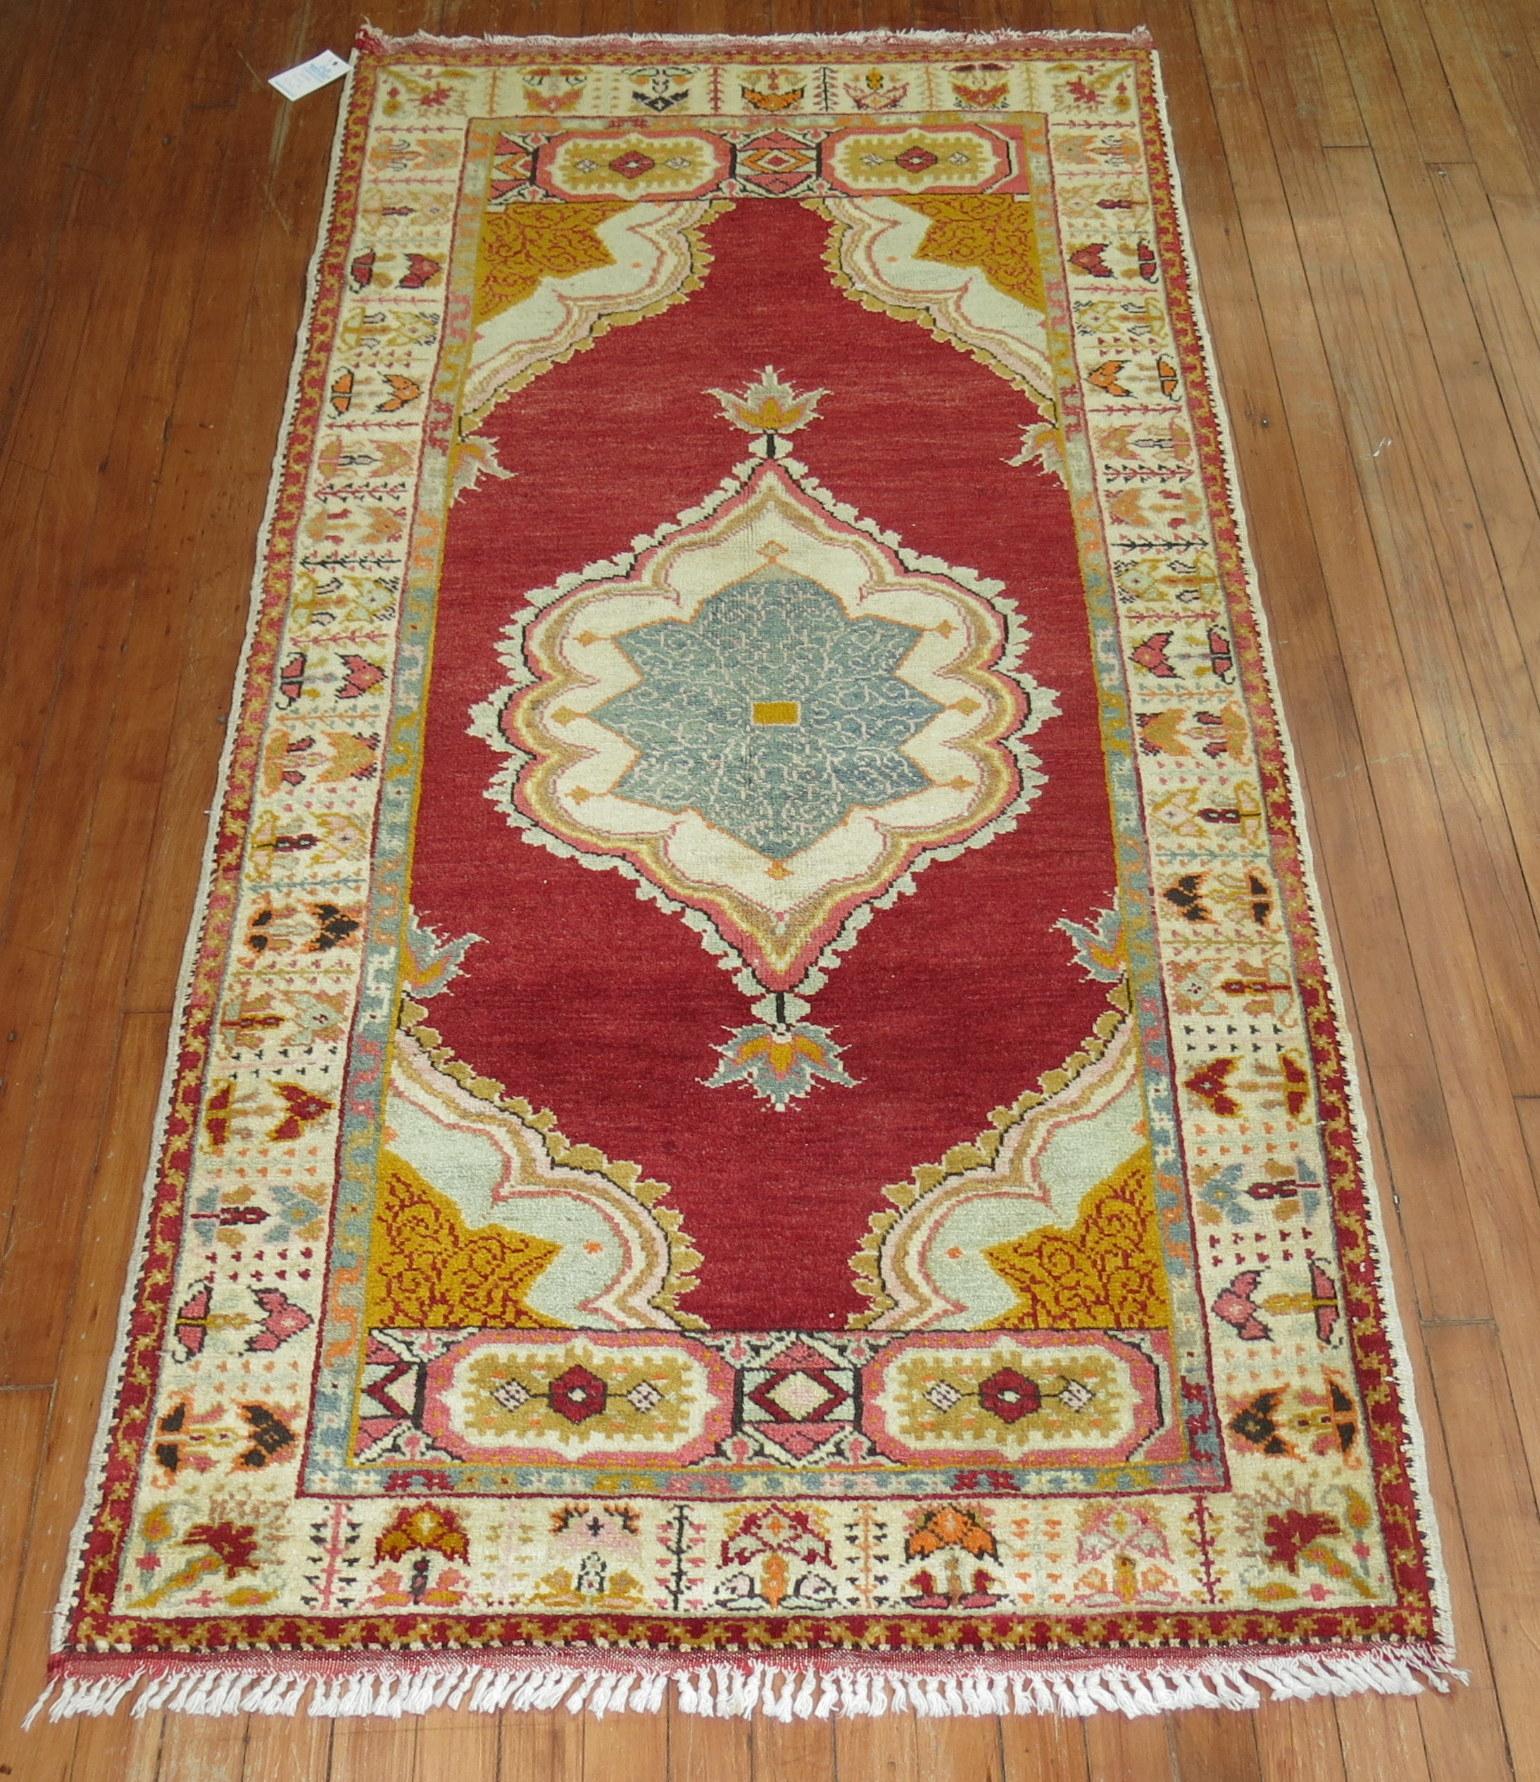 Vintage Turkish Oushak runner with a medallion and border design on a bright red field.

Measures: 3'5